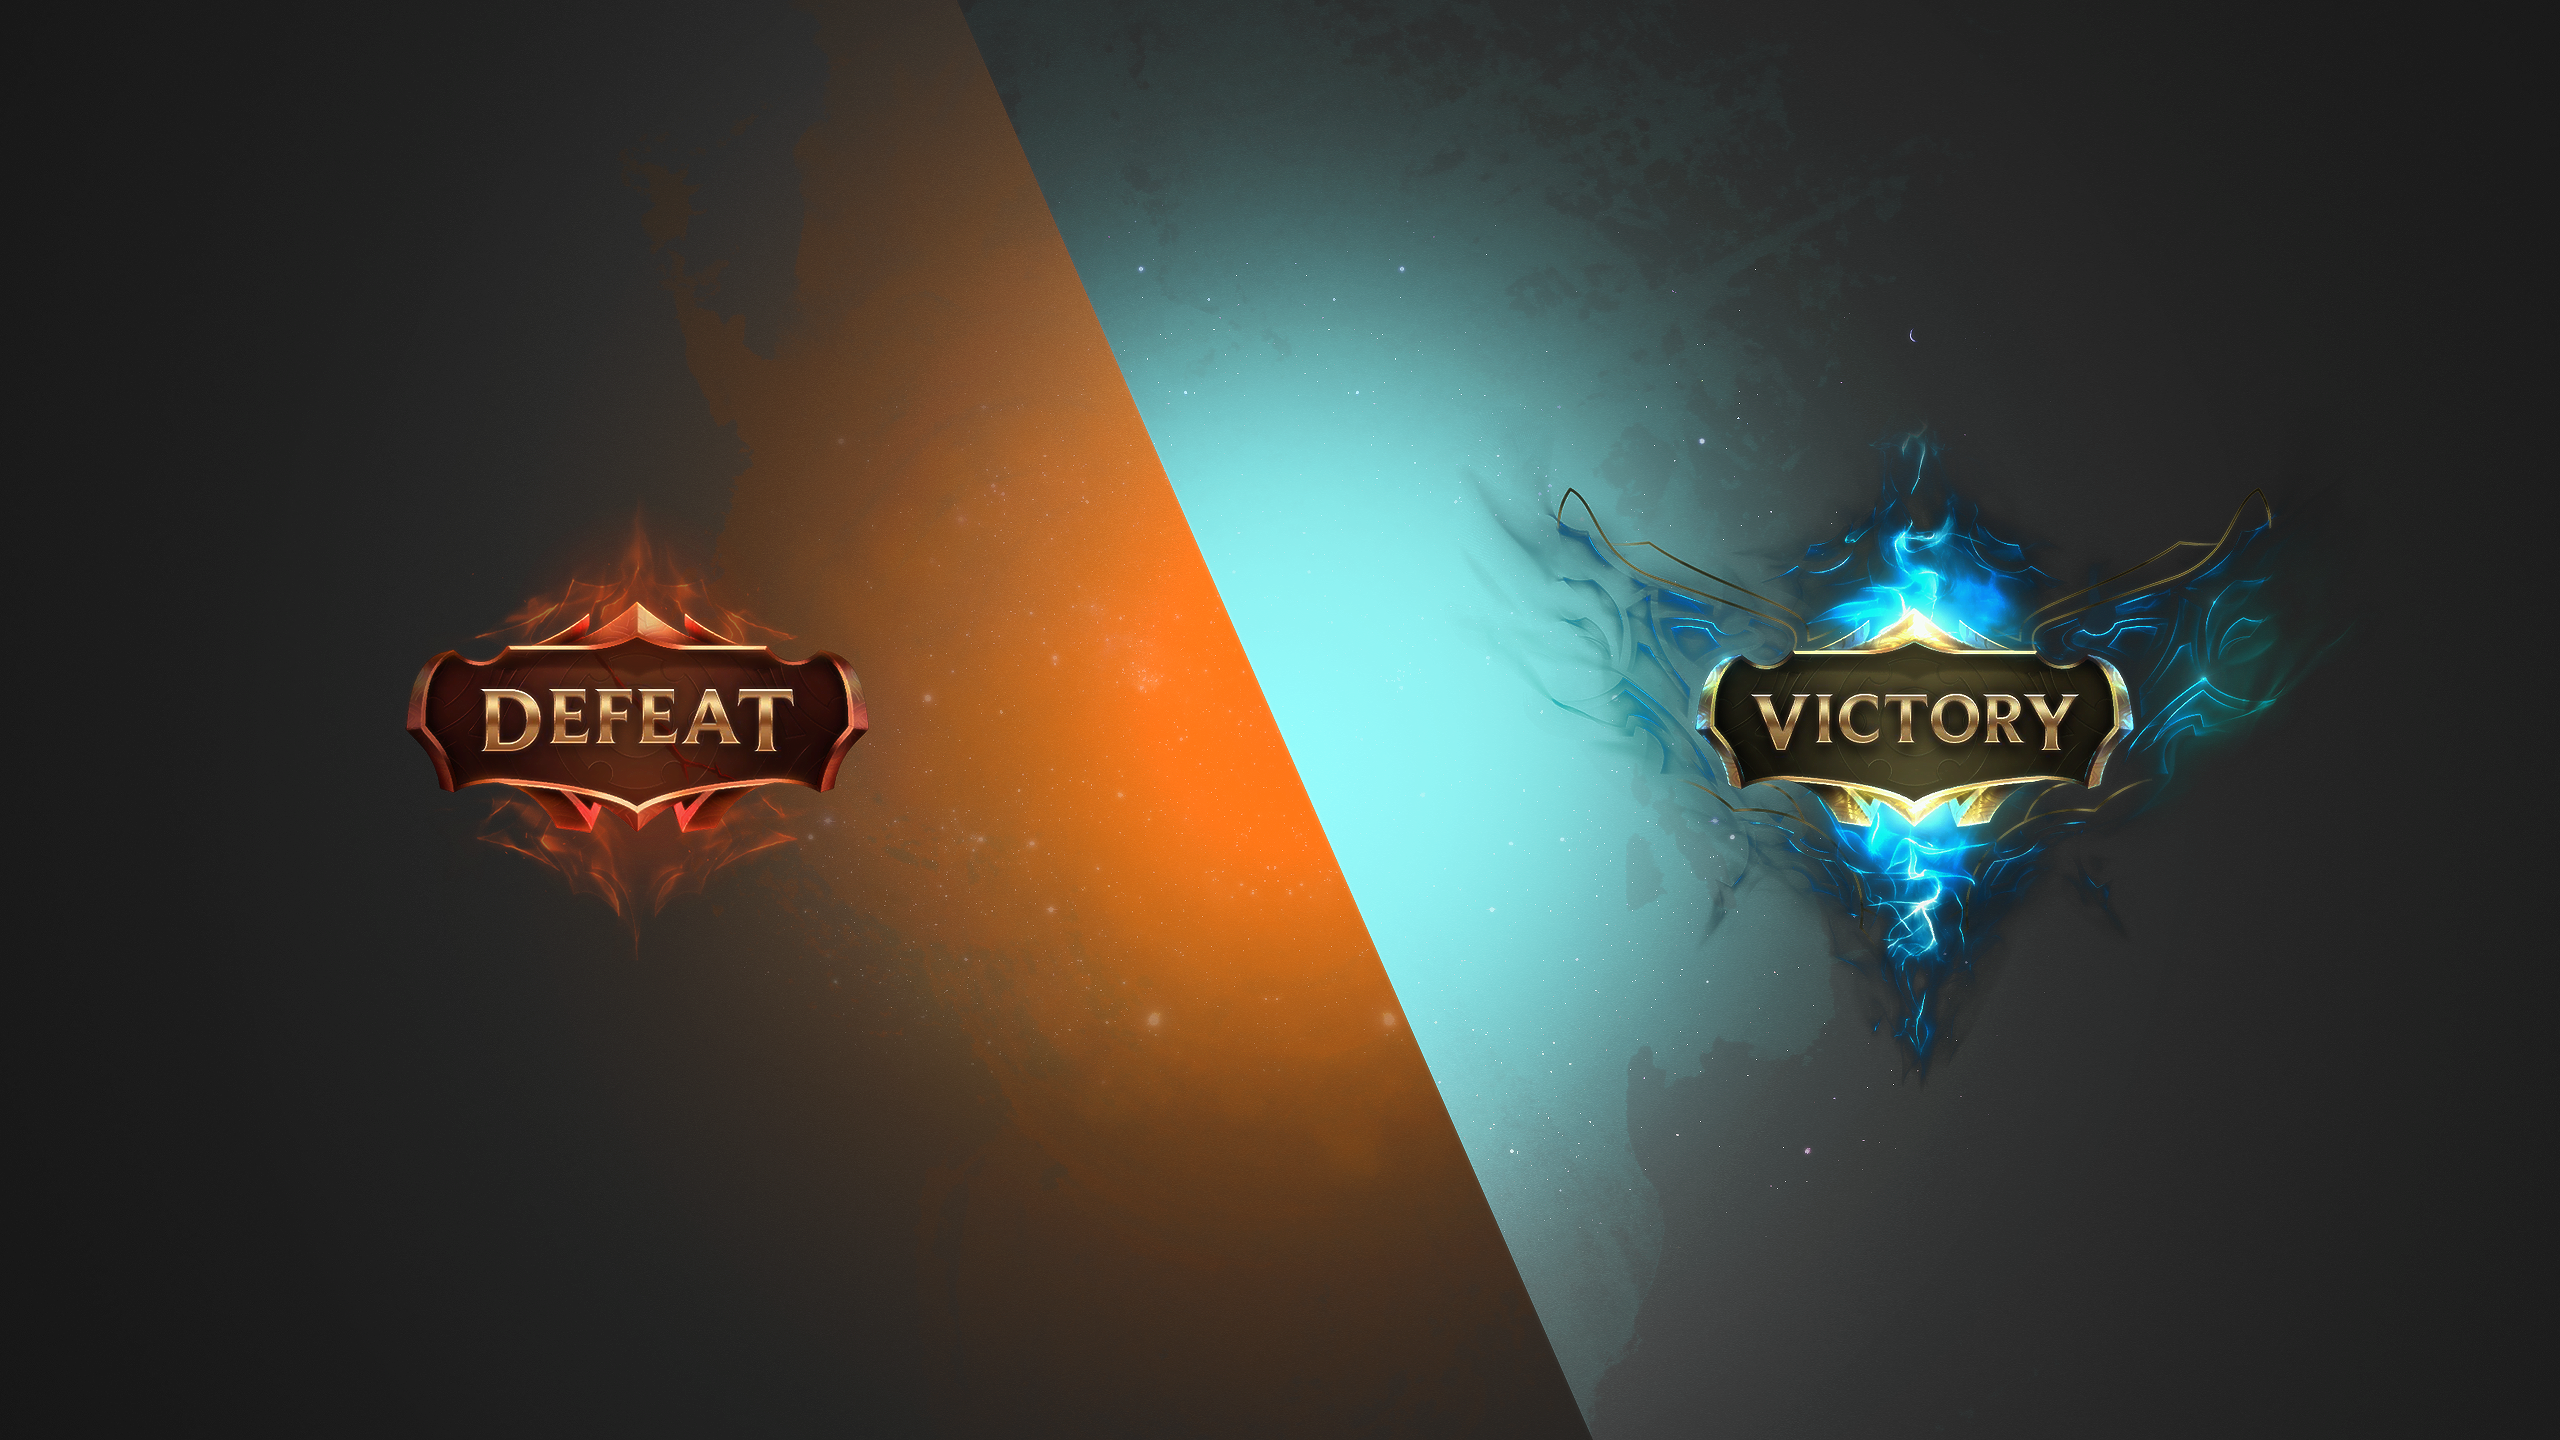 I Made Some Wallpapers With The New Victorydefeat Images